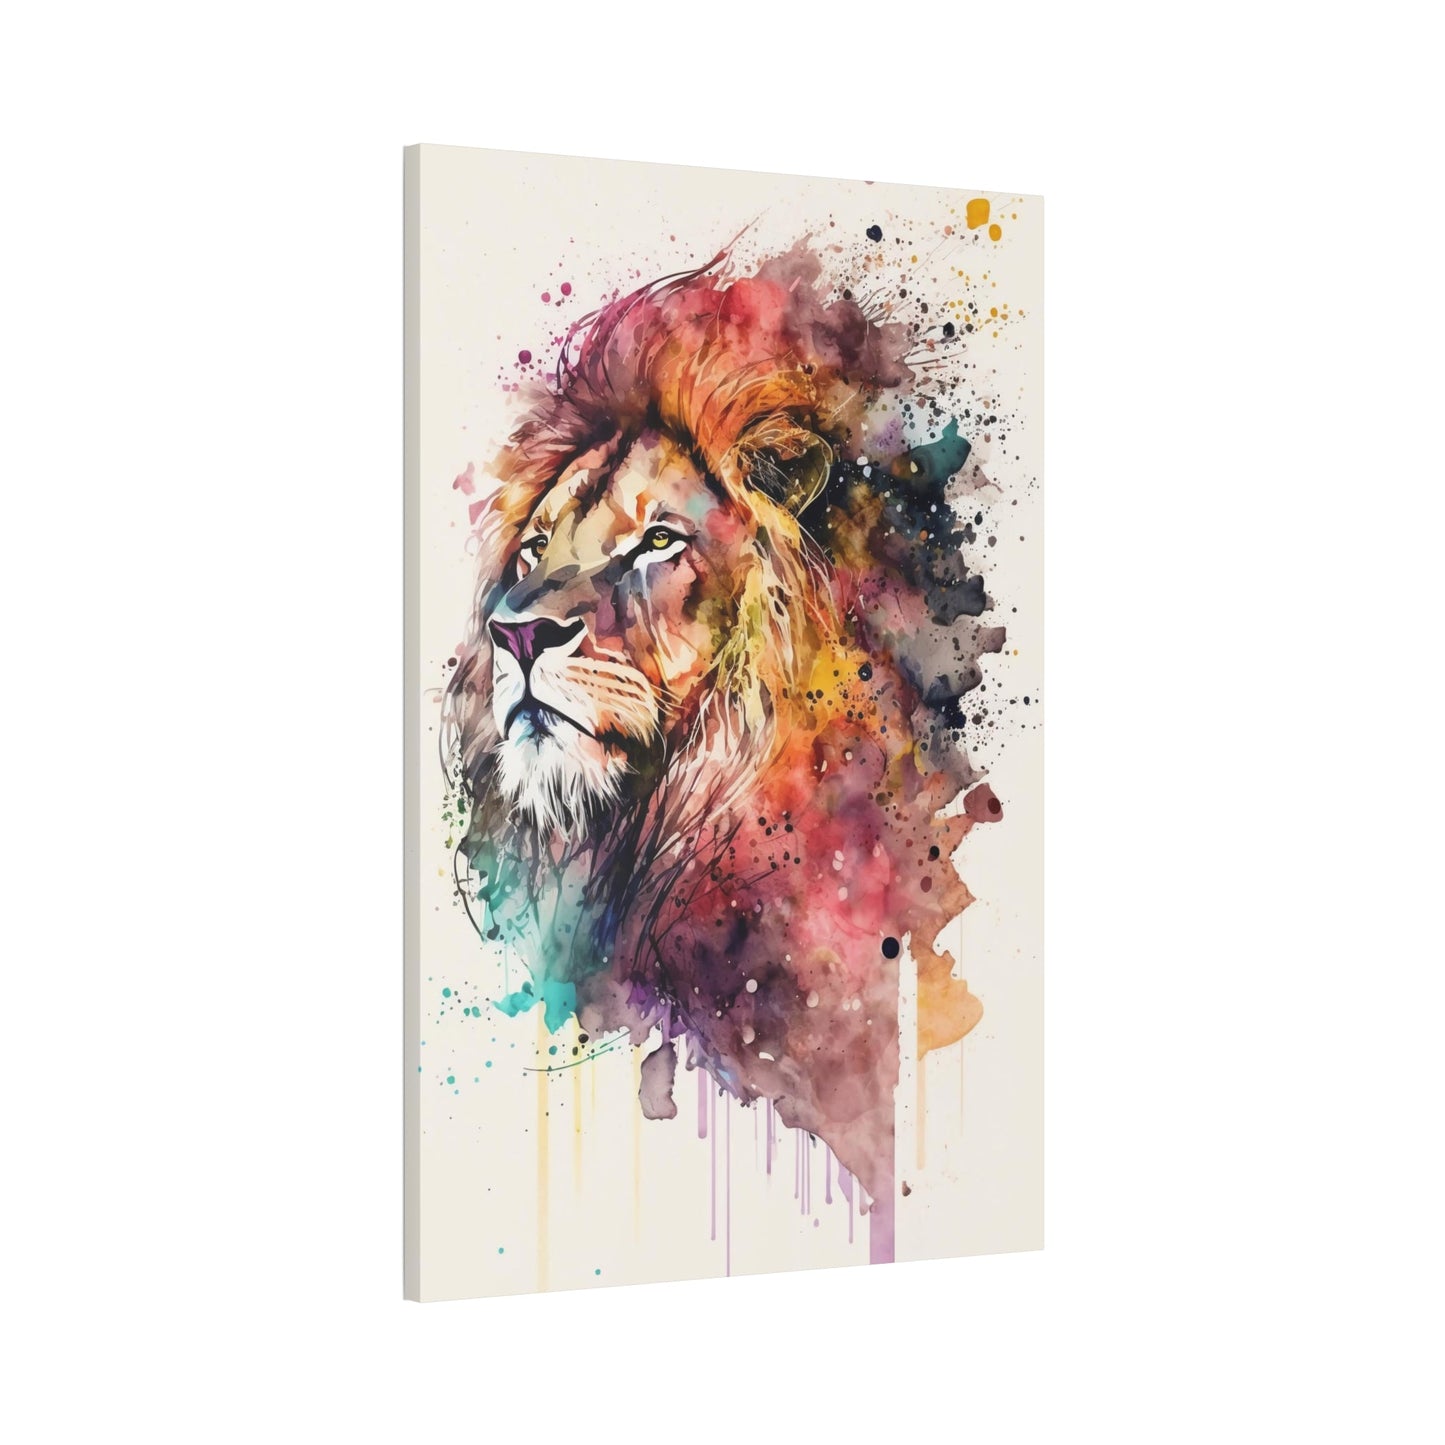 The King's Portrait: Artistic Print on Framed Canvas of a Regal Lion